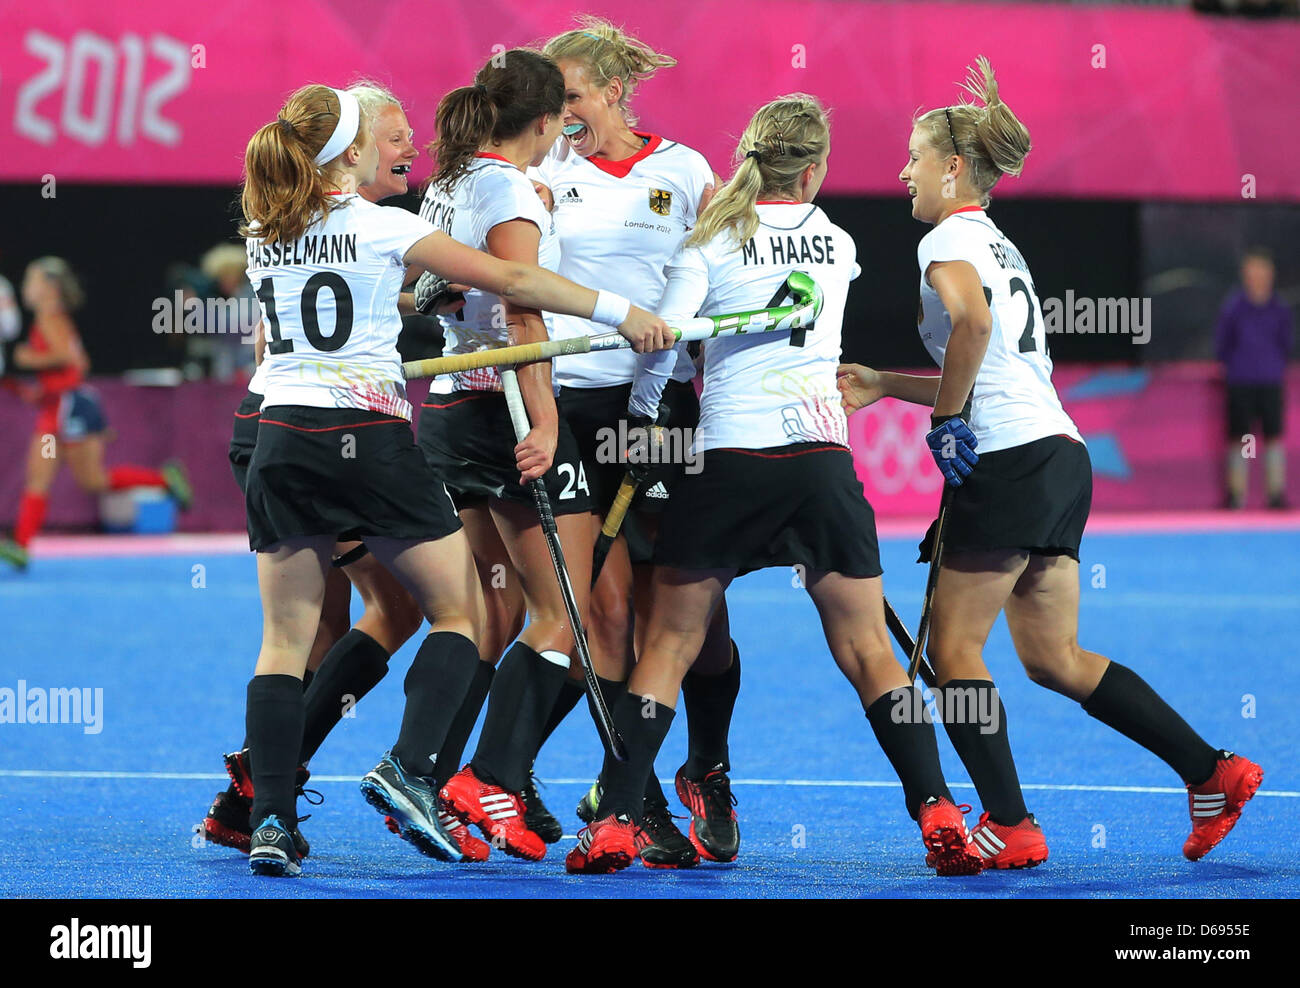 Fanny Rinne (C) of Germany celebrates with teammates after scoring against the US team during women's field hockey at Olympic Park Riverbank Arena for the London 2012 Olympic Games Field Hockey competition in London, Britain, 29 July 2012. Photo: Christian Charisius  +++(c) dpa - Bildfunk+++ Stock Photo